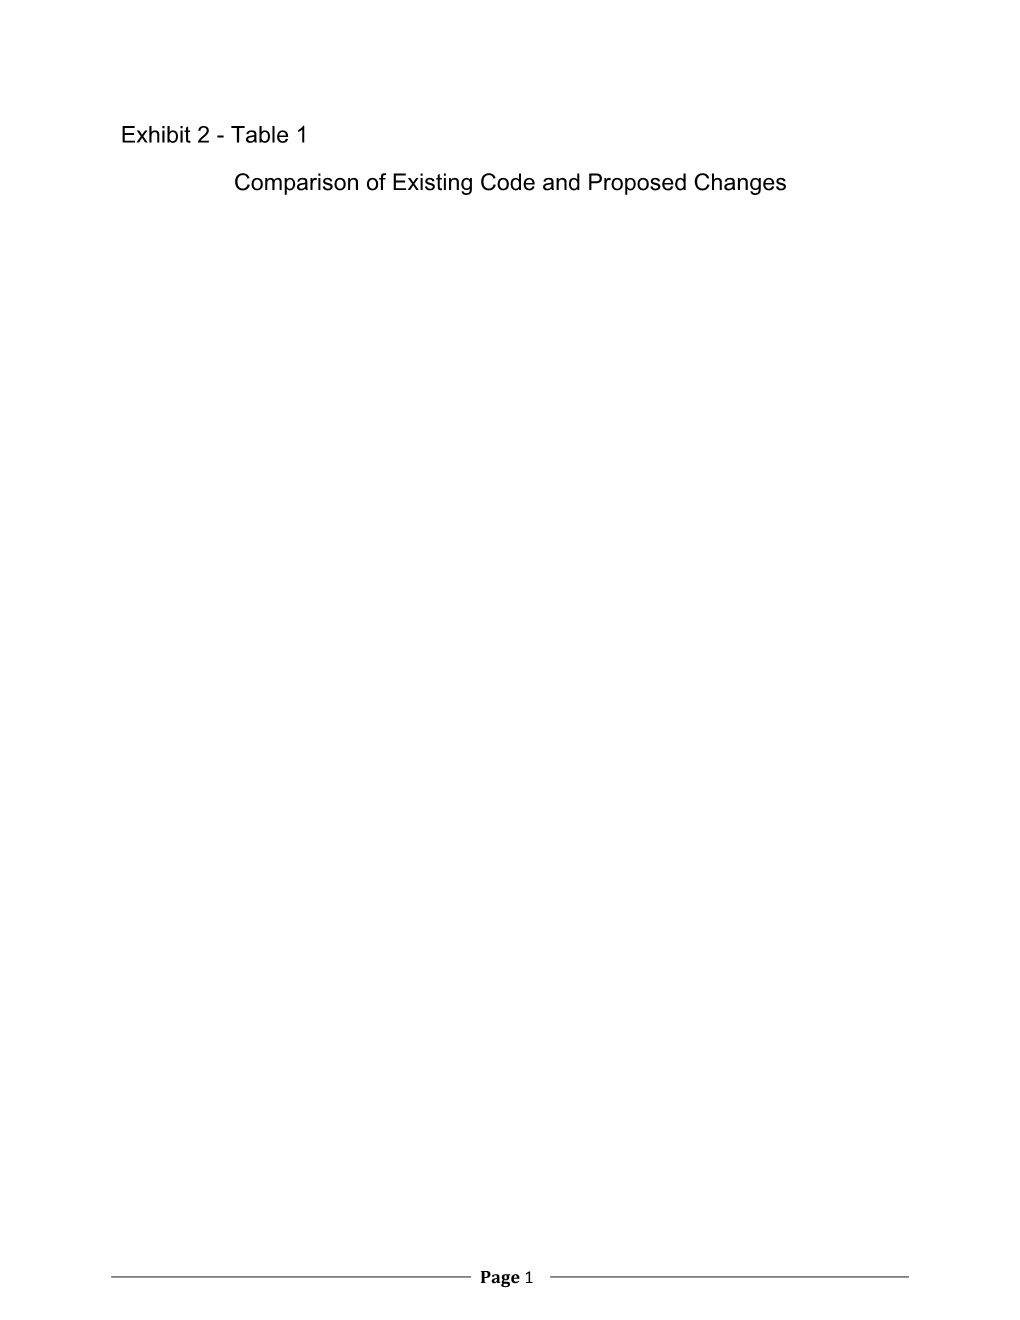 Comparison of Existing Code and Proposed Changes